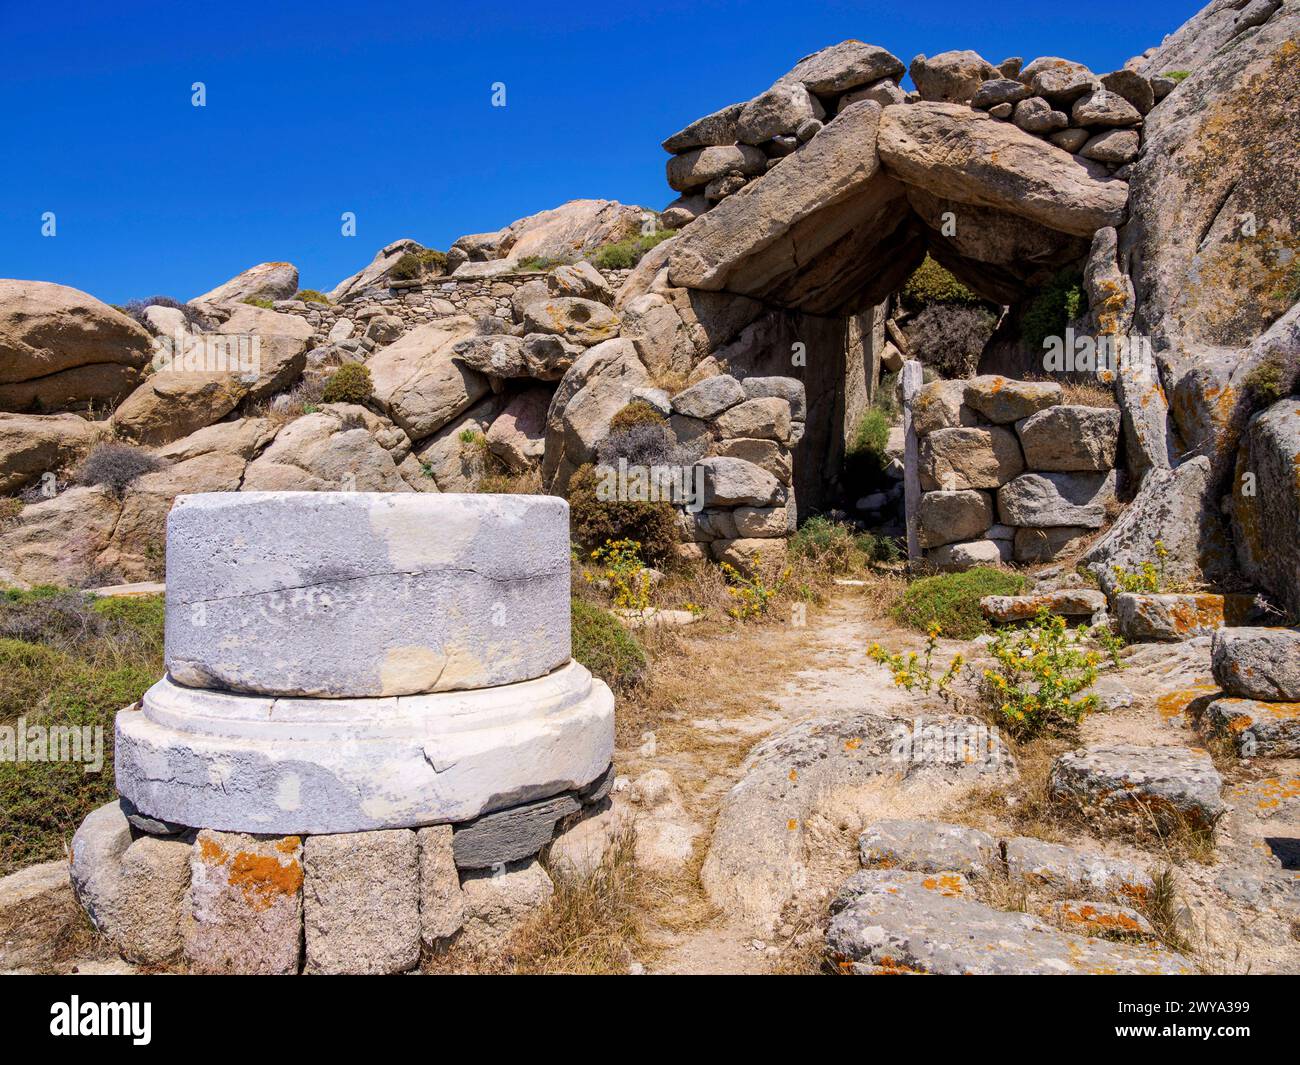 Grotto of Heracles, Mount Kynthos, Delos Archaeological Site, UNESCO World Heritage Site, Delos Island, Cyclades, Greek Islands, Greece, Europe Copyri Stock Photo